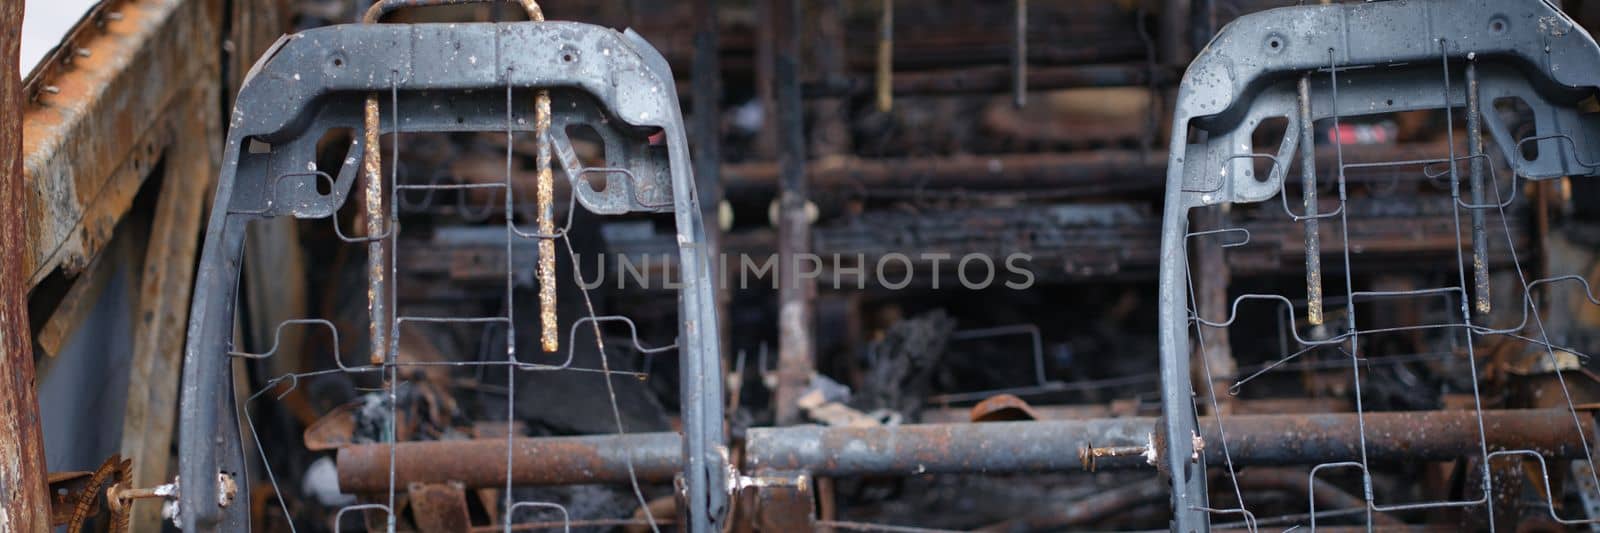 Burnt rusty car after fire or accident by kuprevich